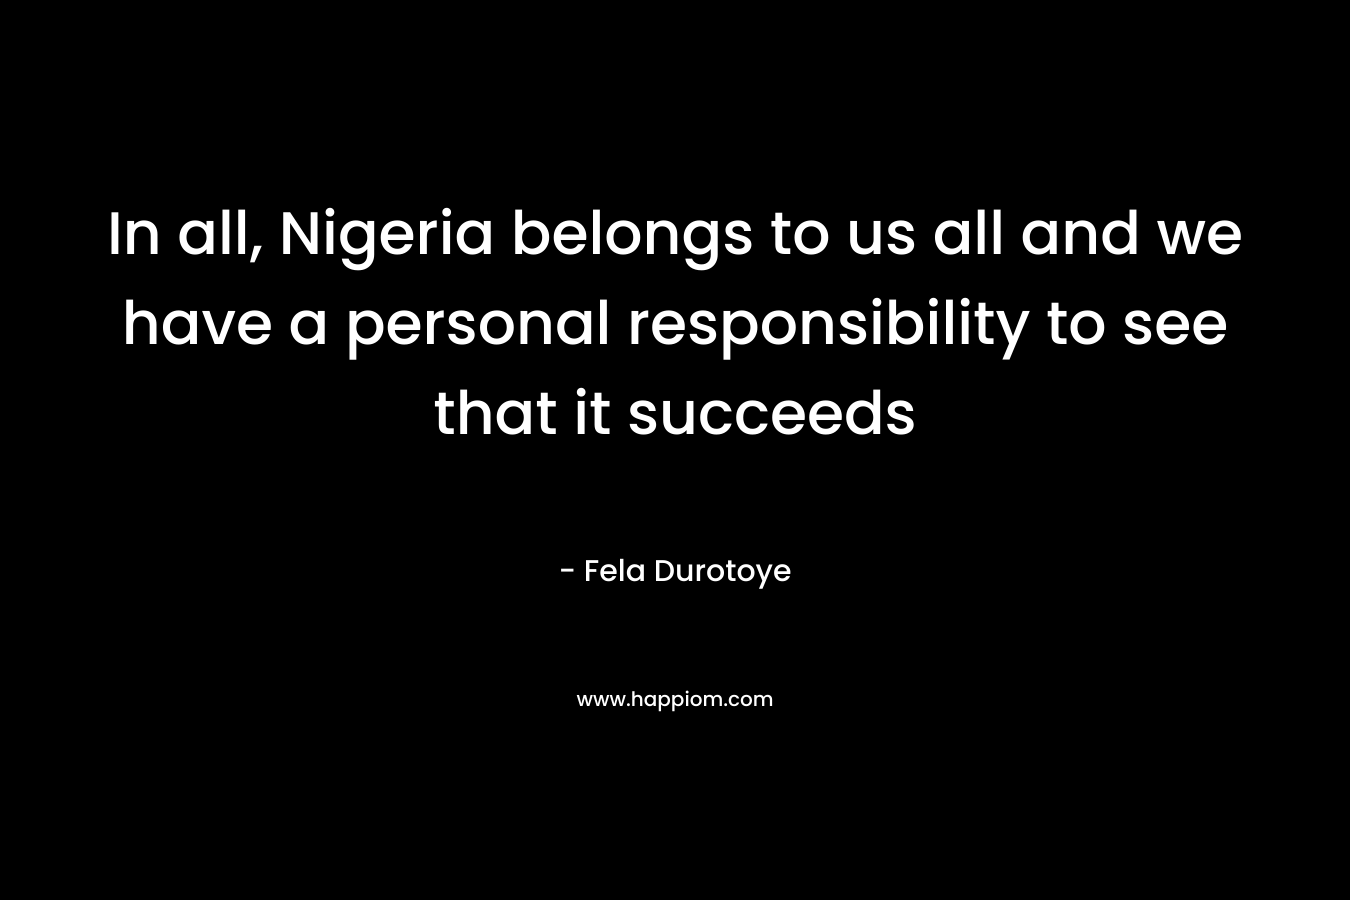 In all, Nigeria belongs to us all and we have a personal responsibility to see that it succeeds